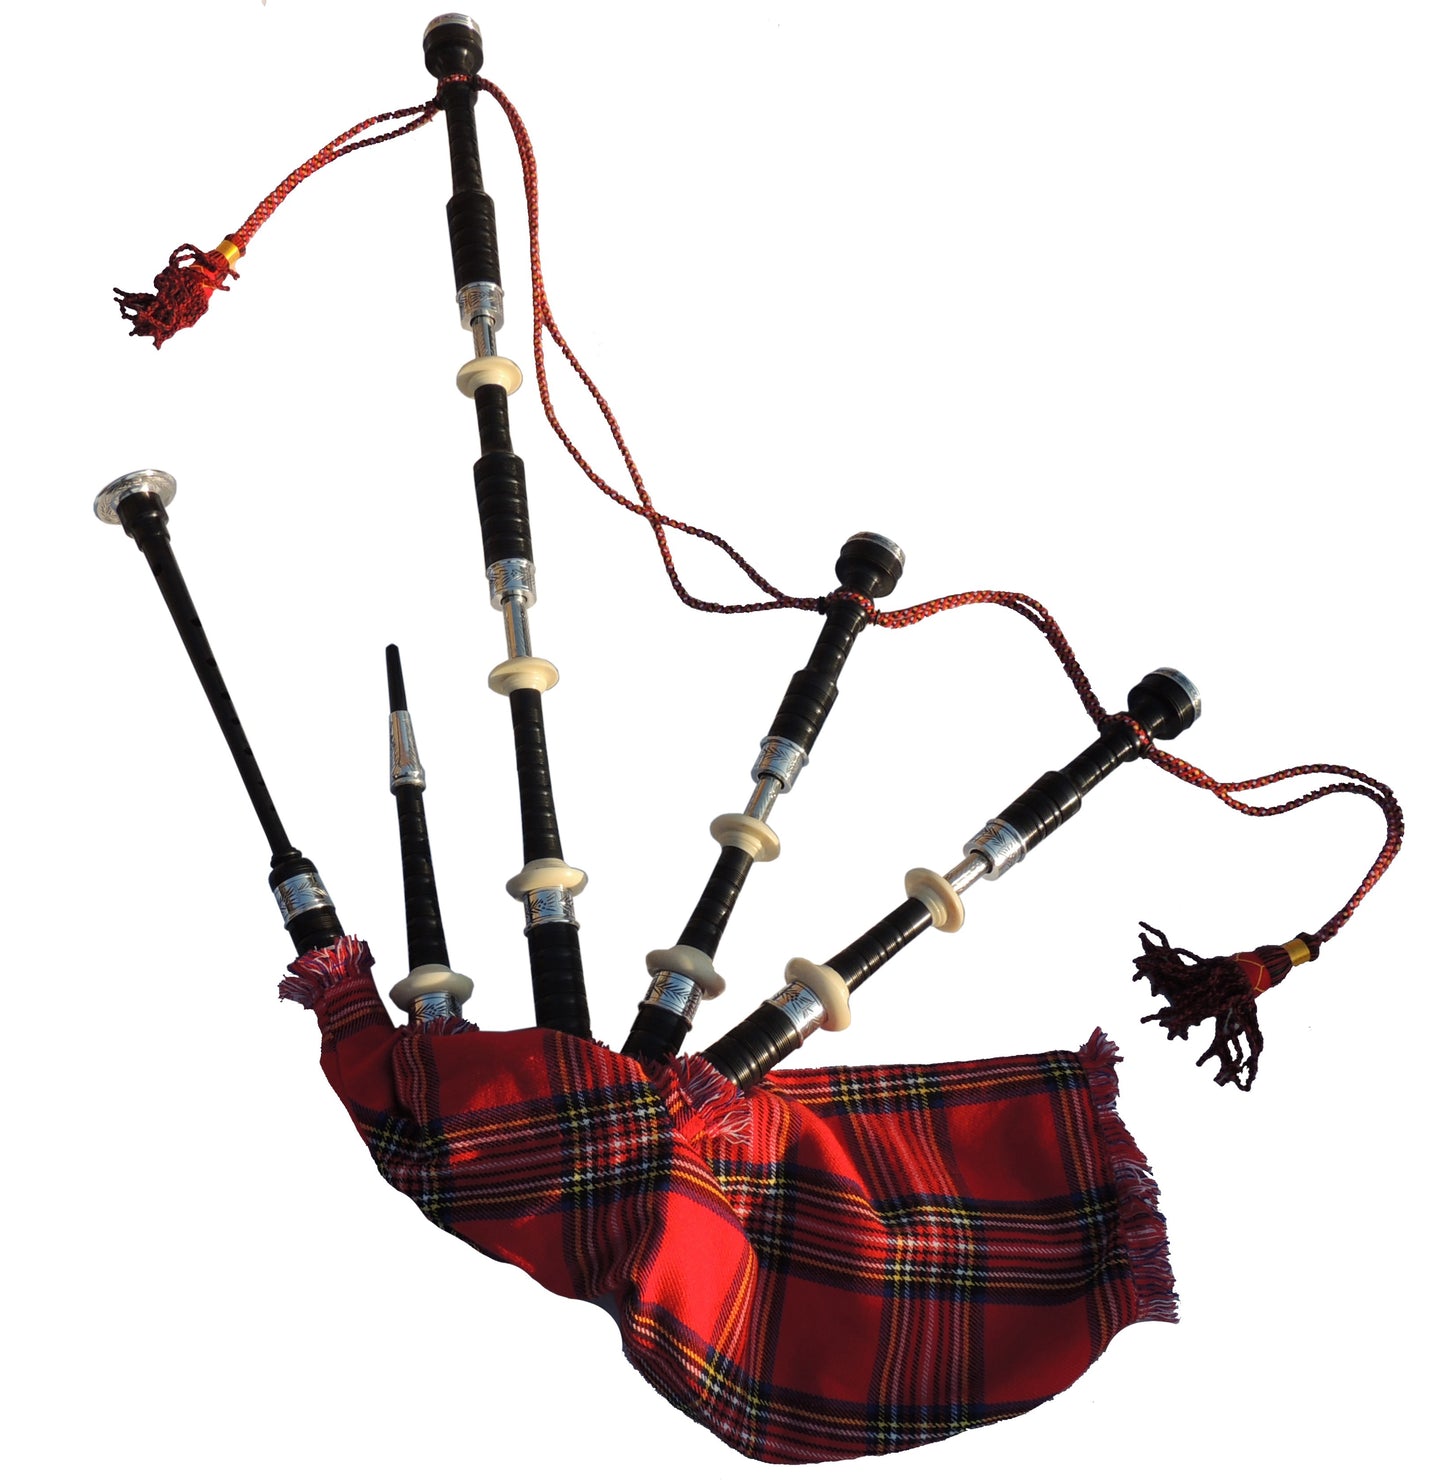 Professional Bagpipes for Sale